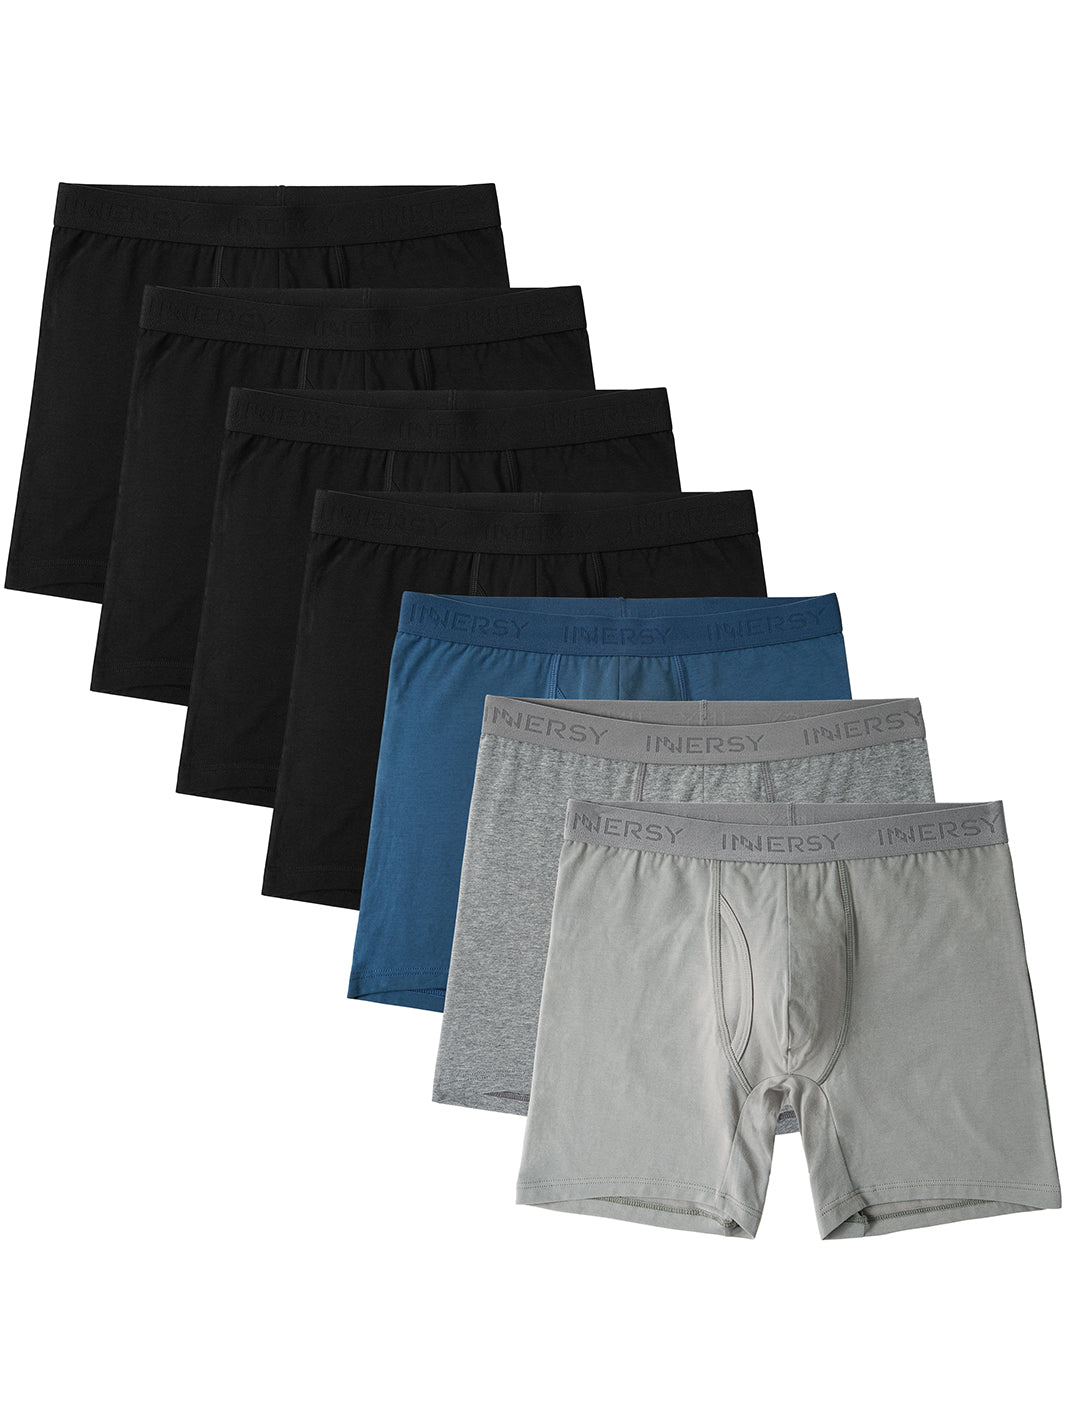 Fruit of the Loom Mens Classic Slip Briefs (Pack of 3) (2XL) (Black) at   Men's Clothing store